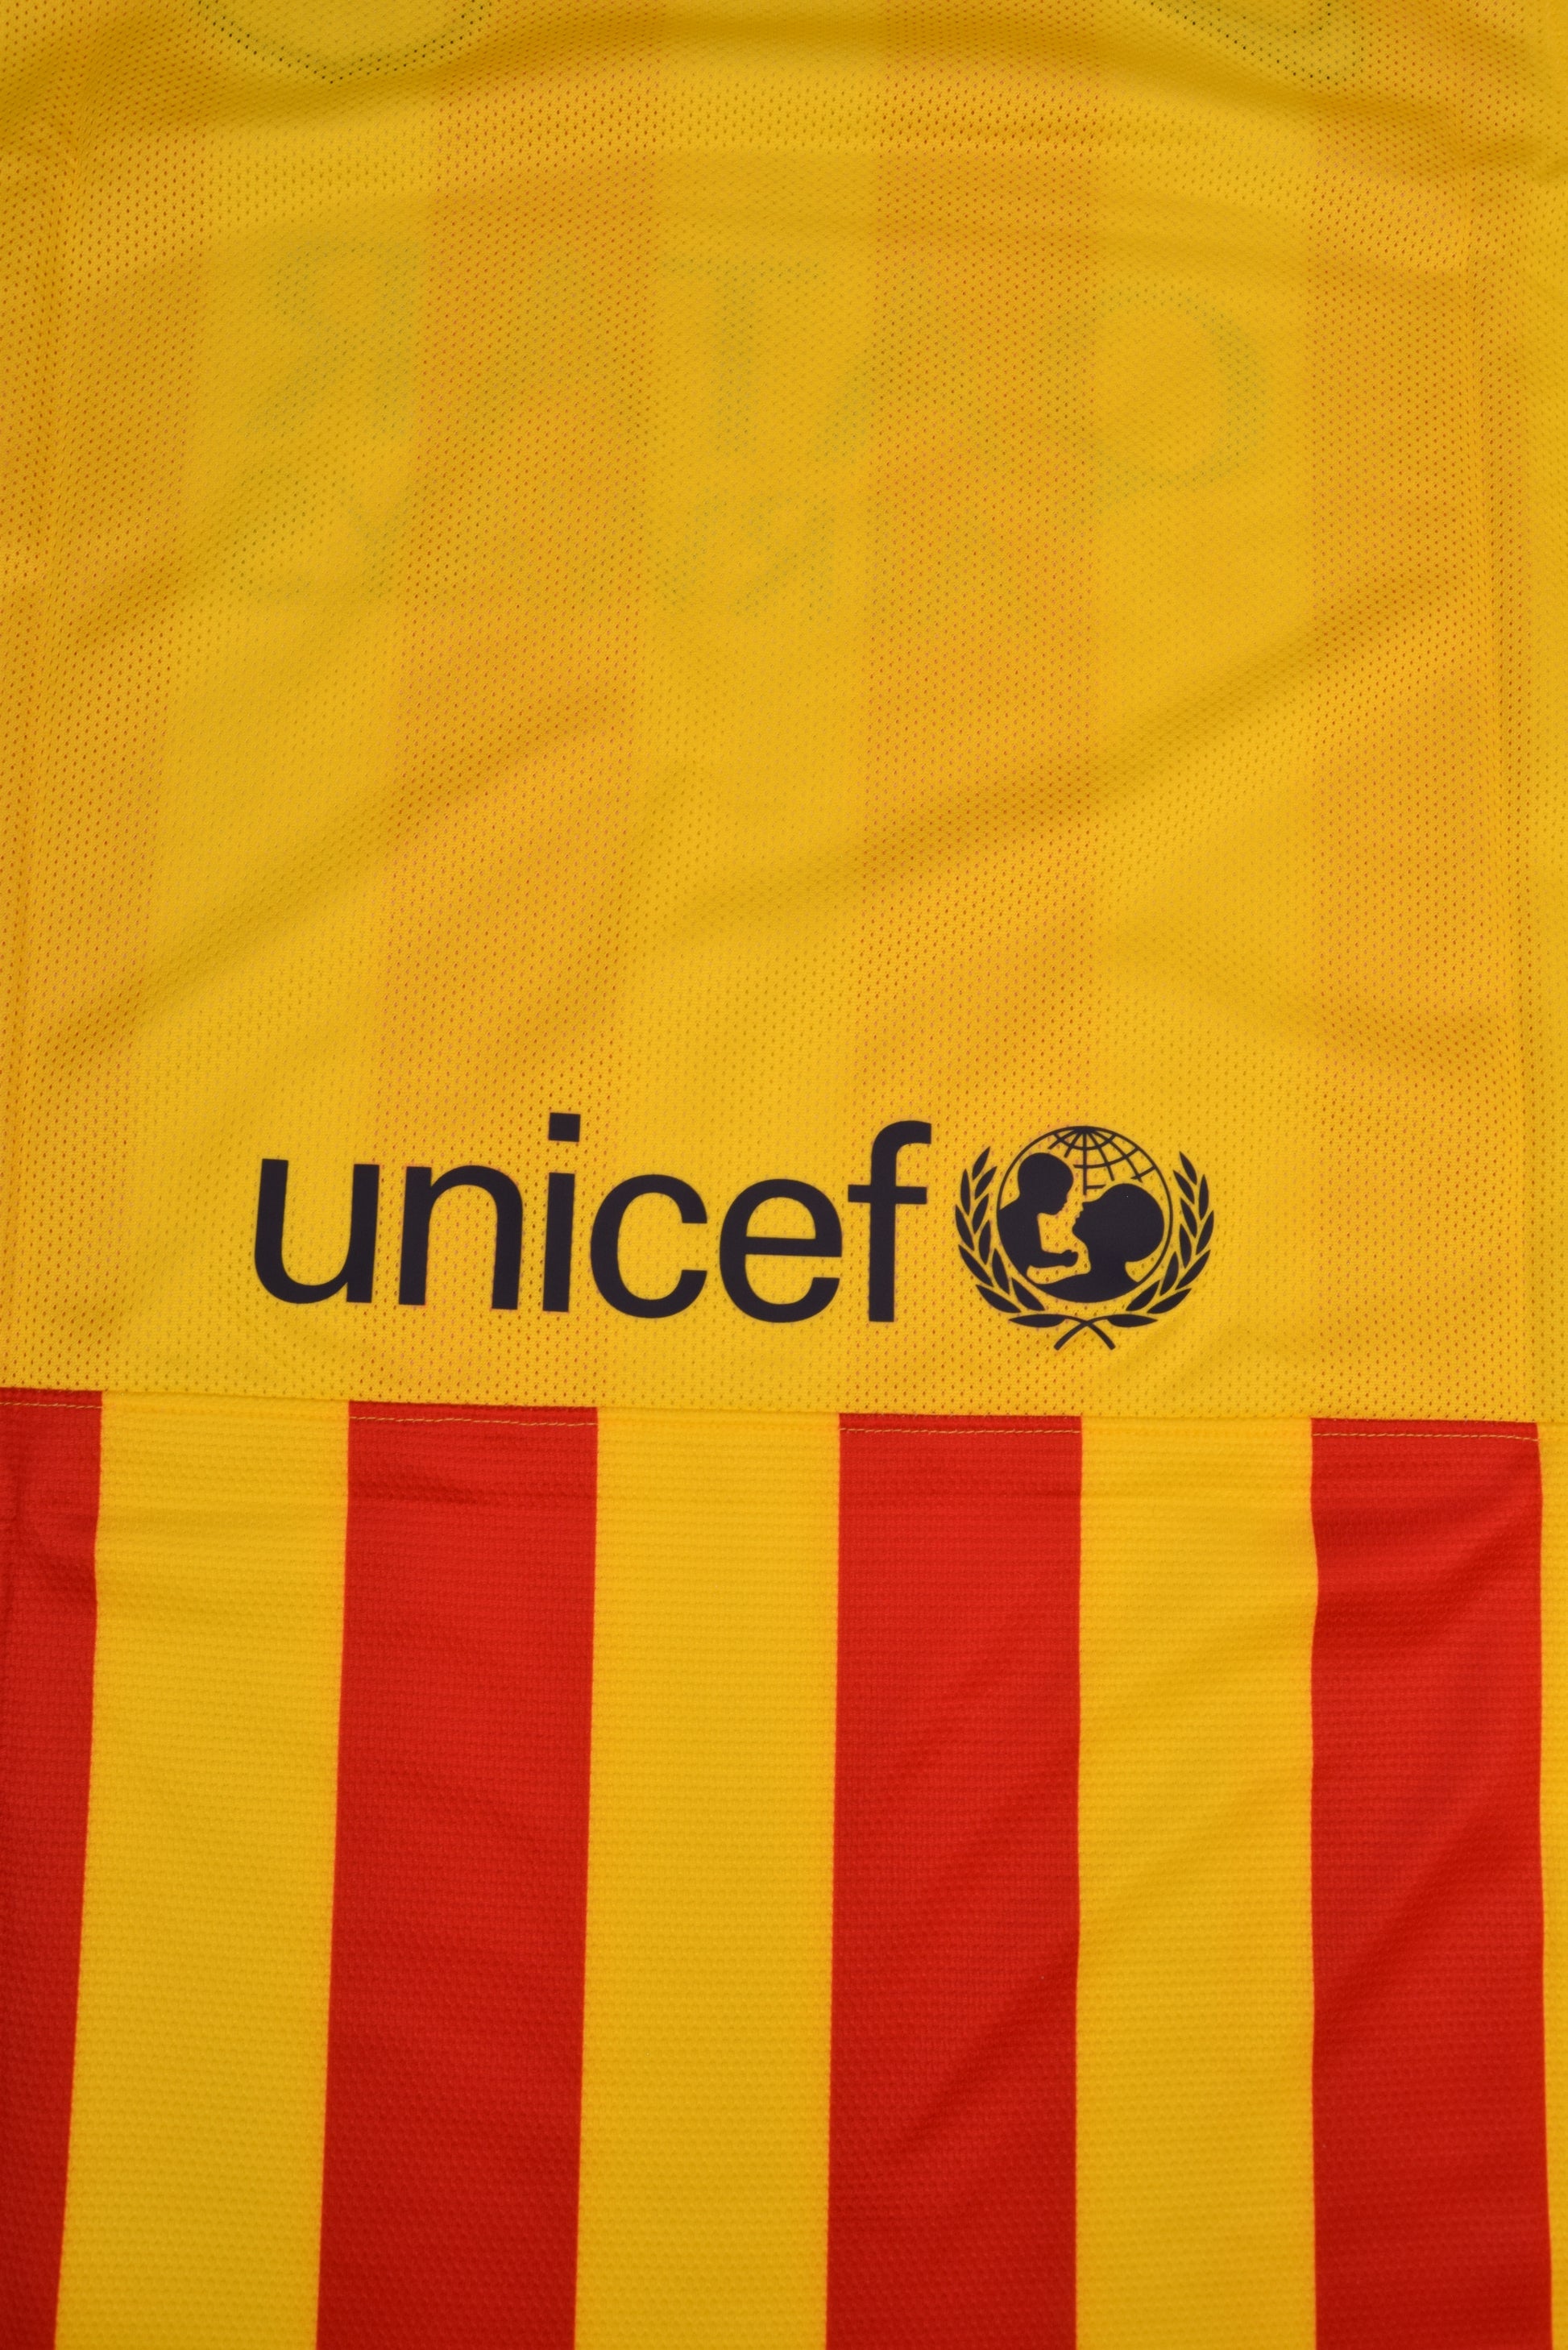 Authentic New Barcelona Nike DRI - FIT Player Issue Away 2013-2014 Away Football Shirt BNWT Deadstock Qatar Airways Unicef Yellow Red Stripes Size L Long Sleeves Dri-Fit